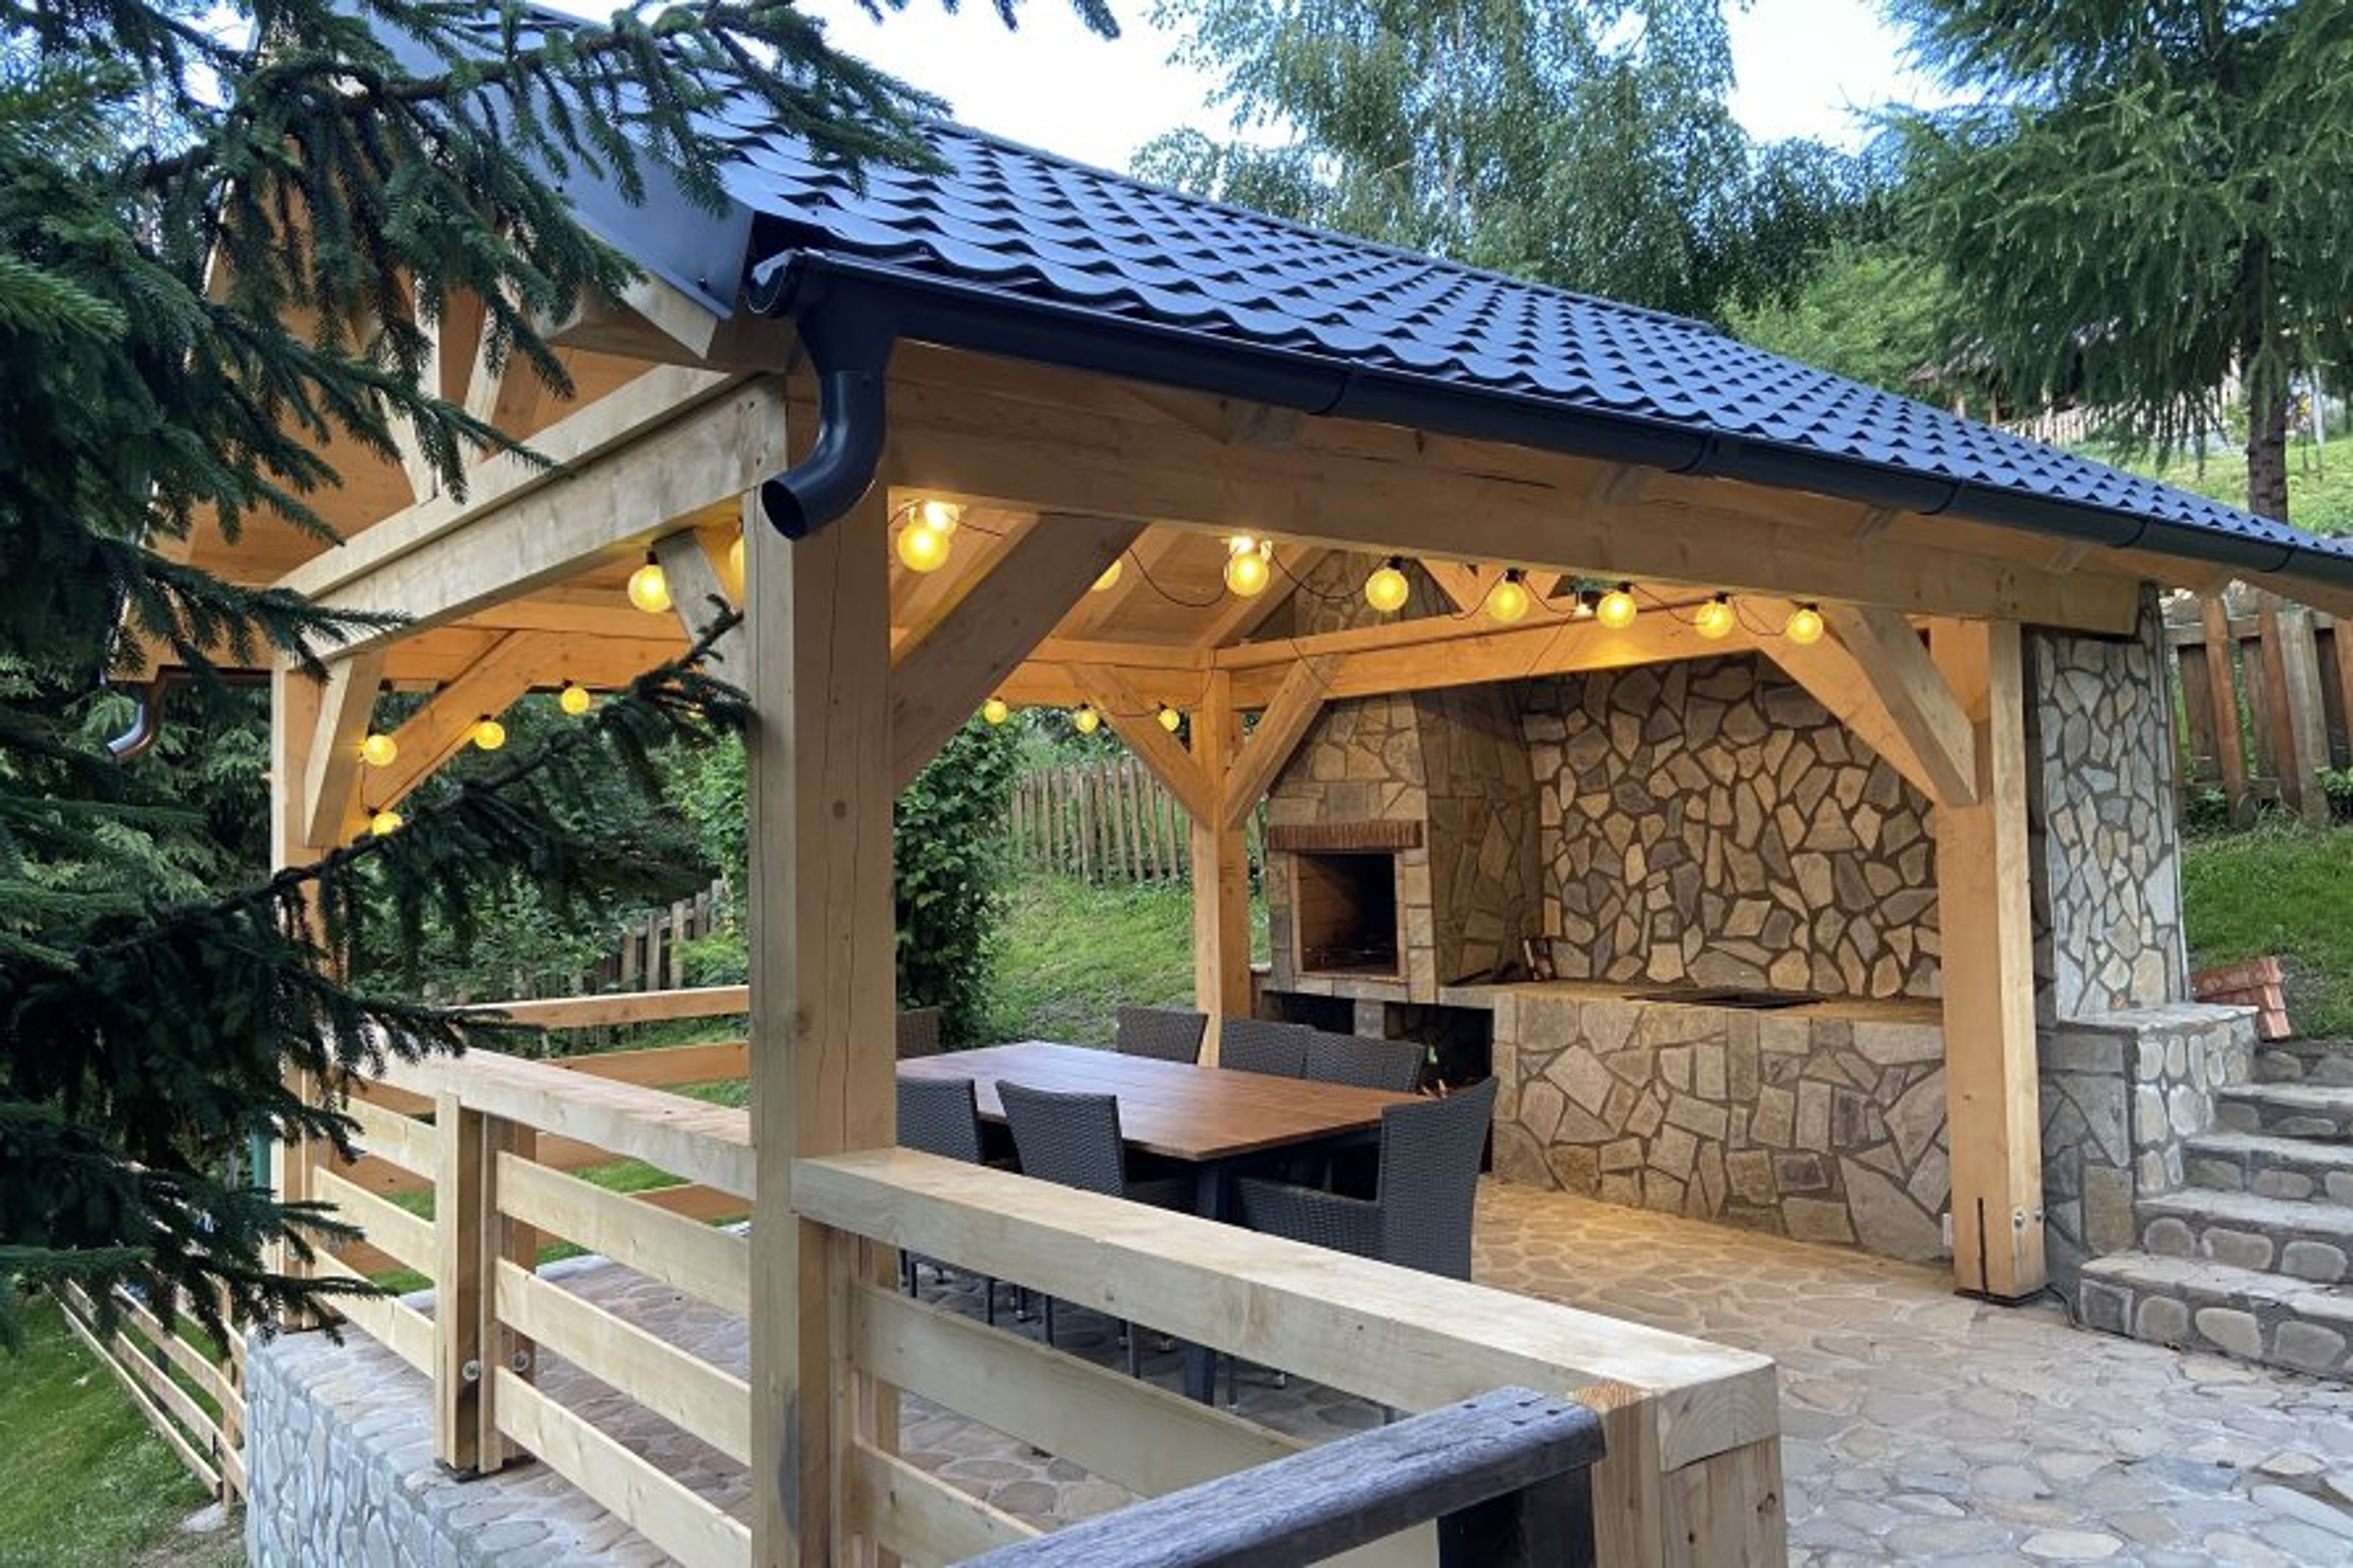 New gazebo and barbecue place